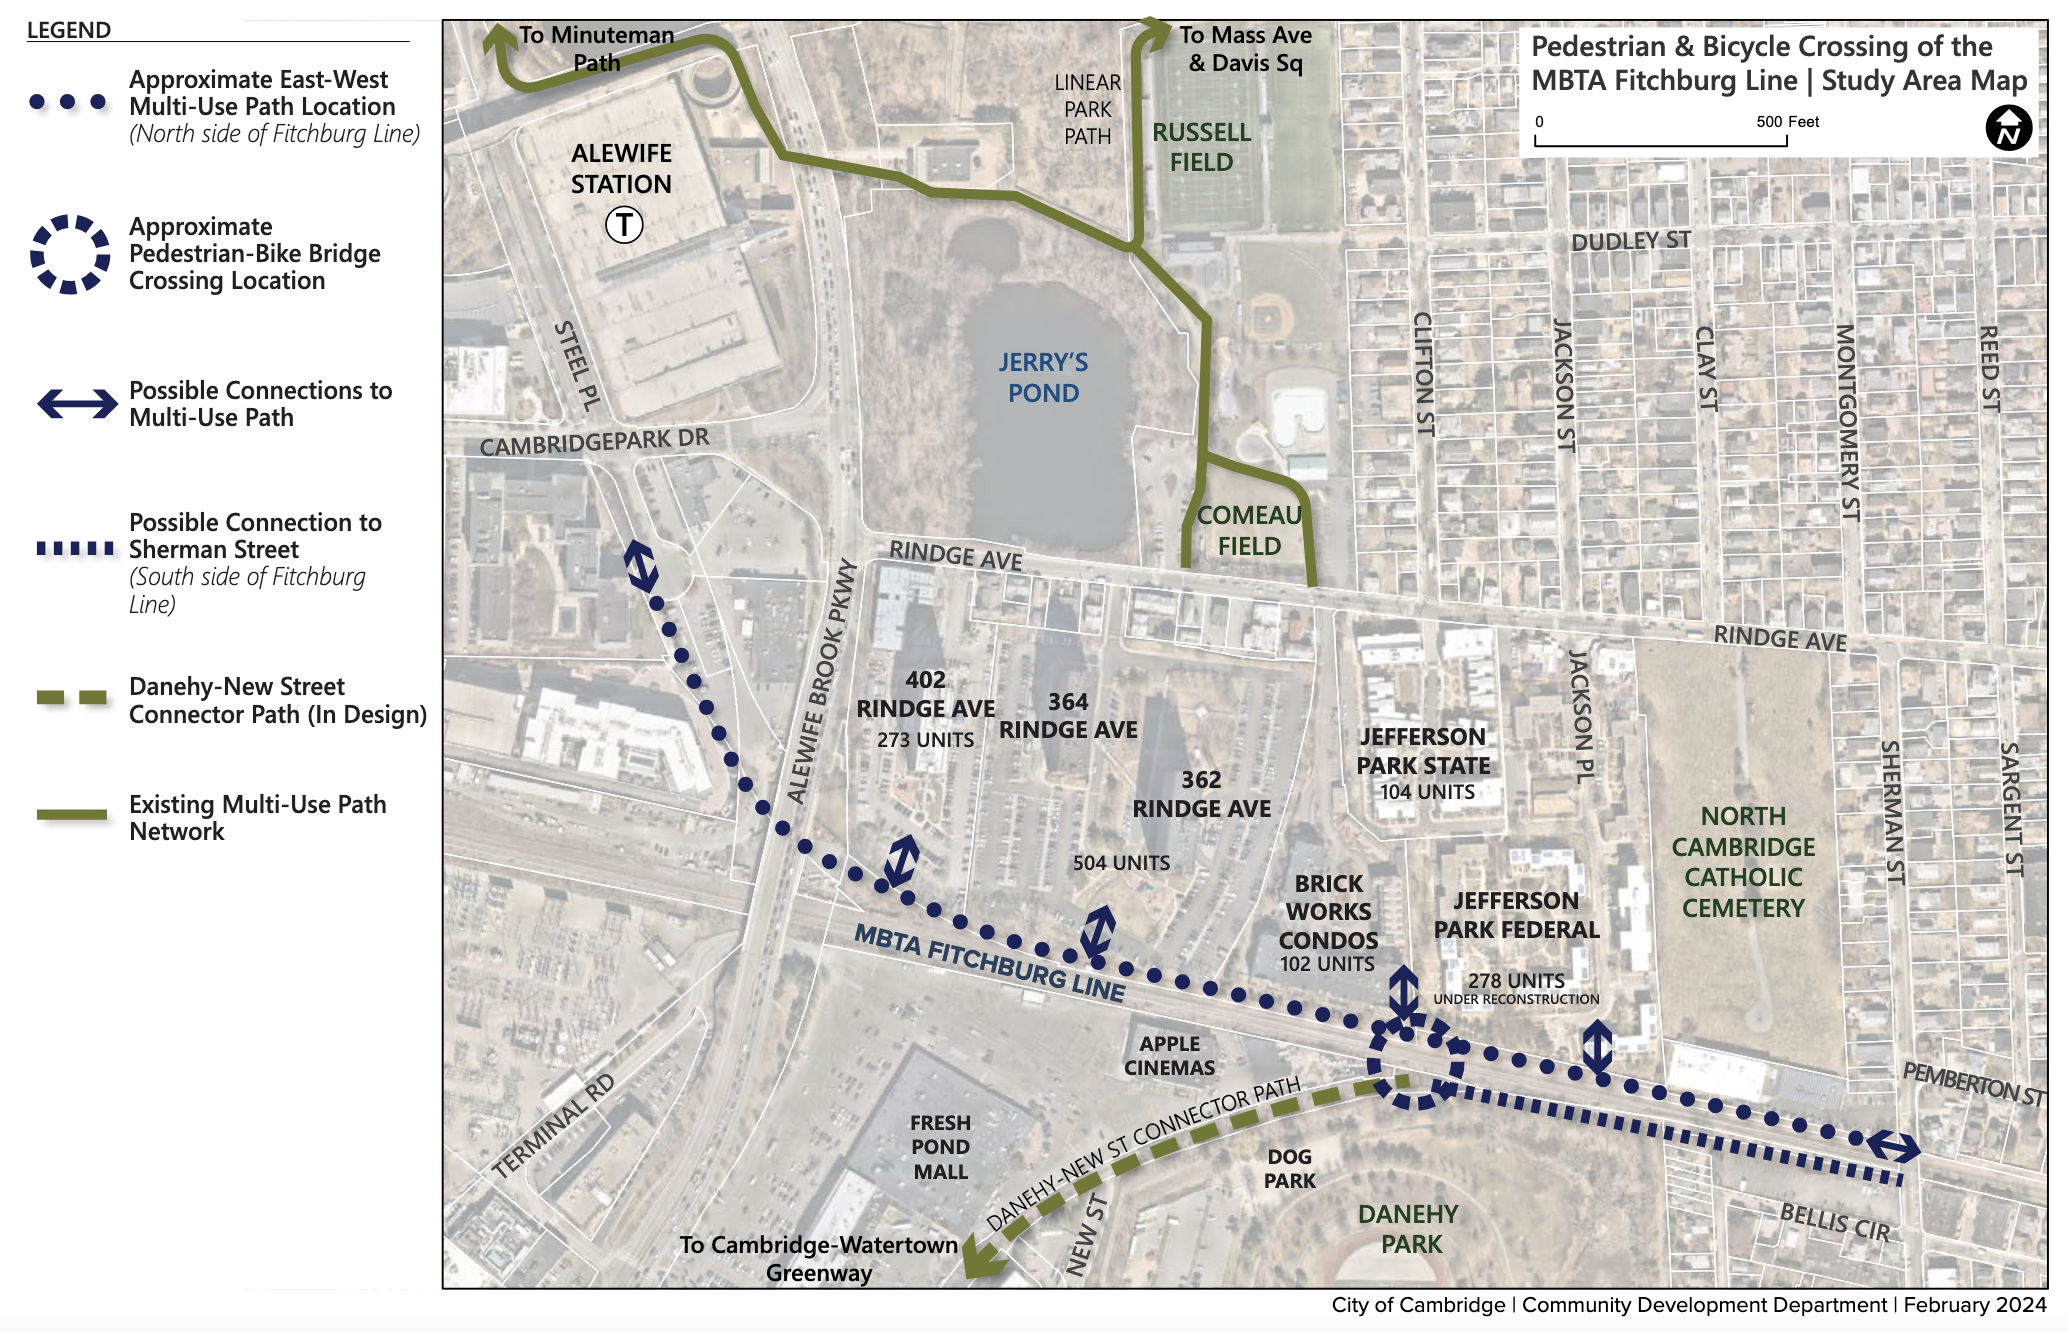 A map of the Alewife/Danehy Park area of Cambridge highlighting new off-street bike and pedestrian trail projects in the works. One dotted line represents a path along the north side of the MBTA Fitchburg Line, linking Alewife Stn. in the NW (upper left) to Sherman St. in the east (lower right) alongside several labelled apartment towers, including the Jefferson Park public housing. A second green dashed line represents a new path that would connect Danehy Park to New Street and Concord Avenue (at the bottom edge of the map). Solid green lines near the upper half of the map indicate existing paths in the Minuteman Bikeway and Mass. Central Rail Trail networks.